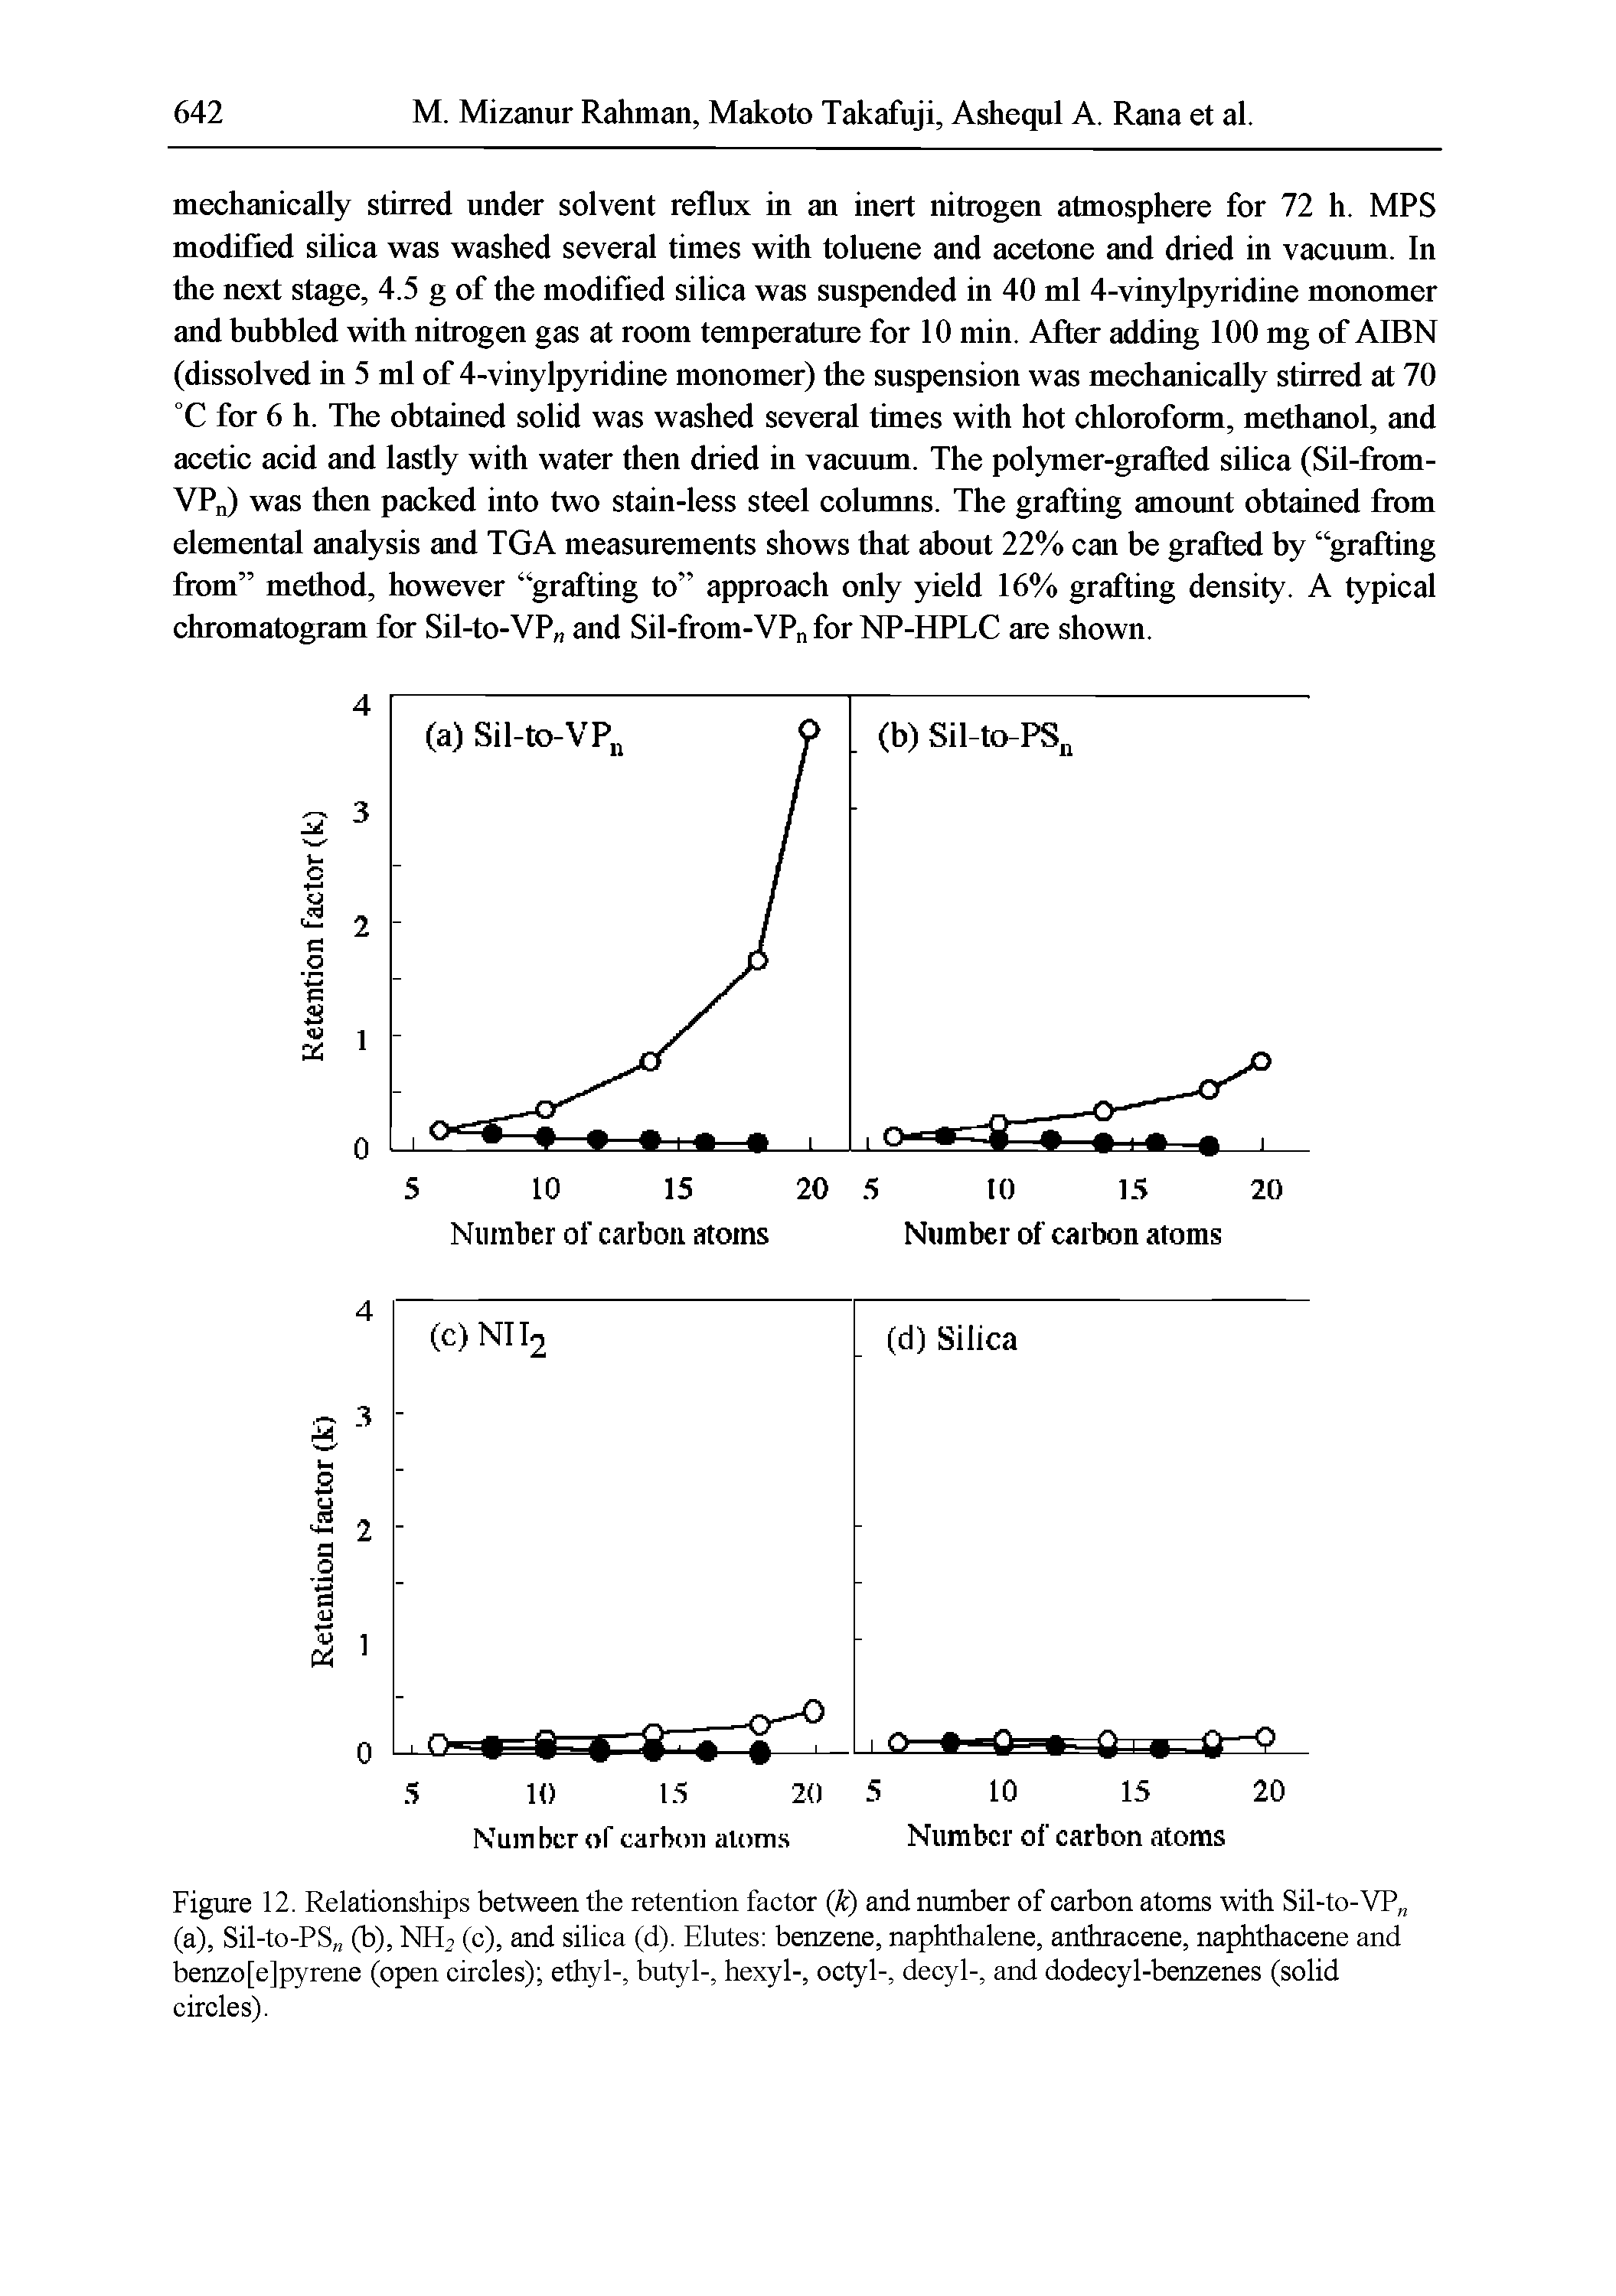 Figure 12. Relationships between the retention factor (k) and number of carbon atoms with Sil-to-VP (a), Sil-to-PS (b), NH2 (c), and silica (d). Elutes benzene, naphthalene, anthracene, naphthacene and benzo[e]pyrene (open circles) ethyl-, butyl-, hexyl-, octyl-, decyl-, and dodecyl-benzenes (solid circles).